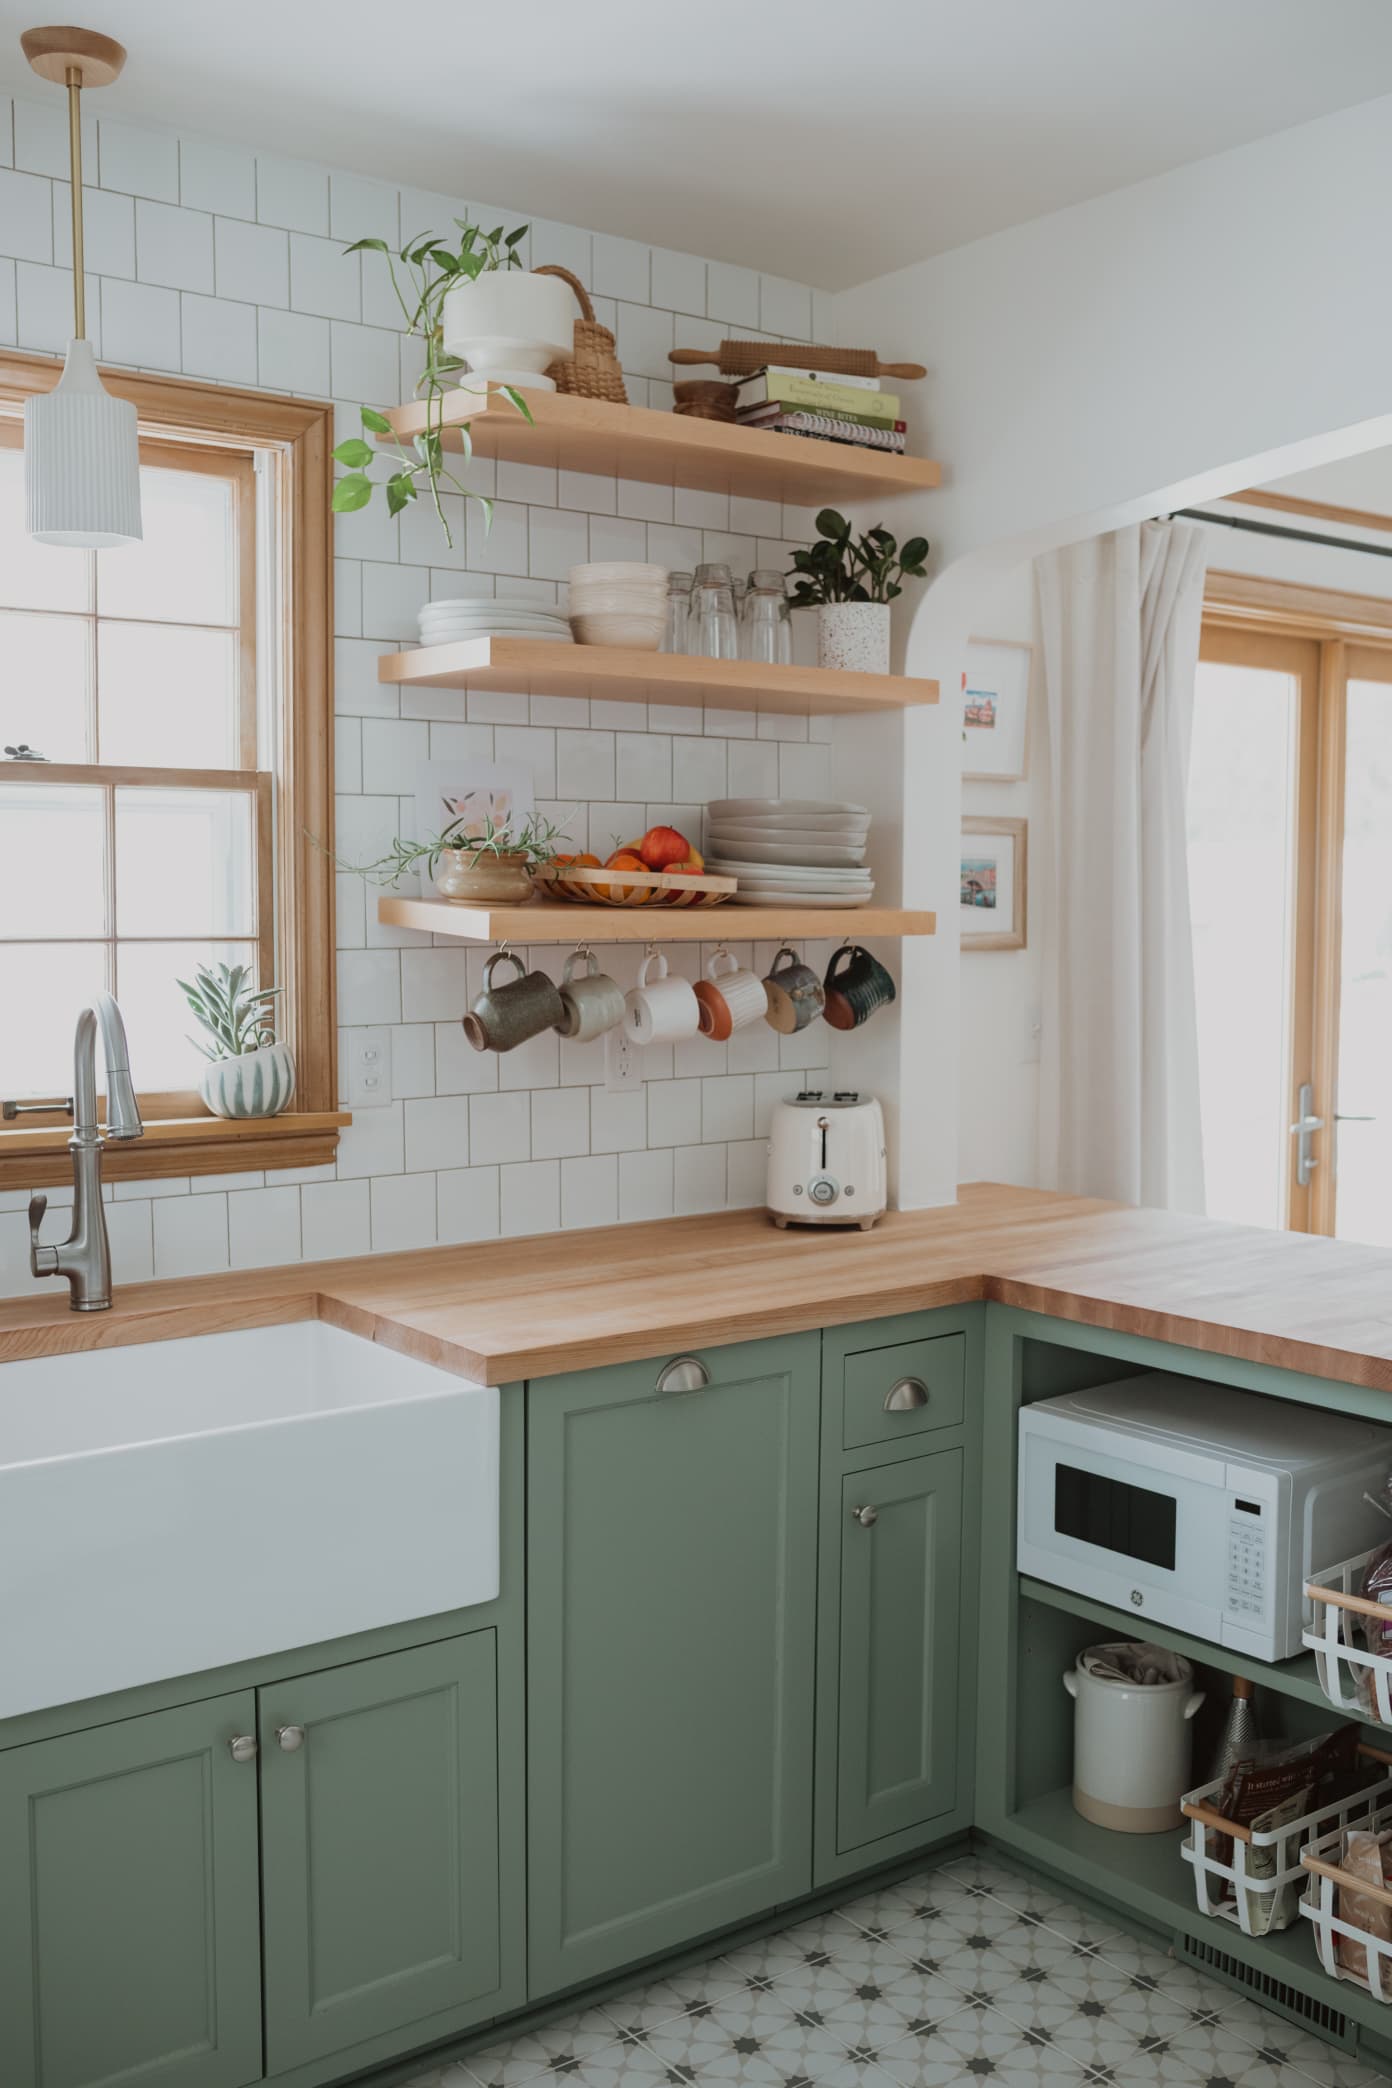 2022 Kitchen Trends That Are in and Out, According to Designers